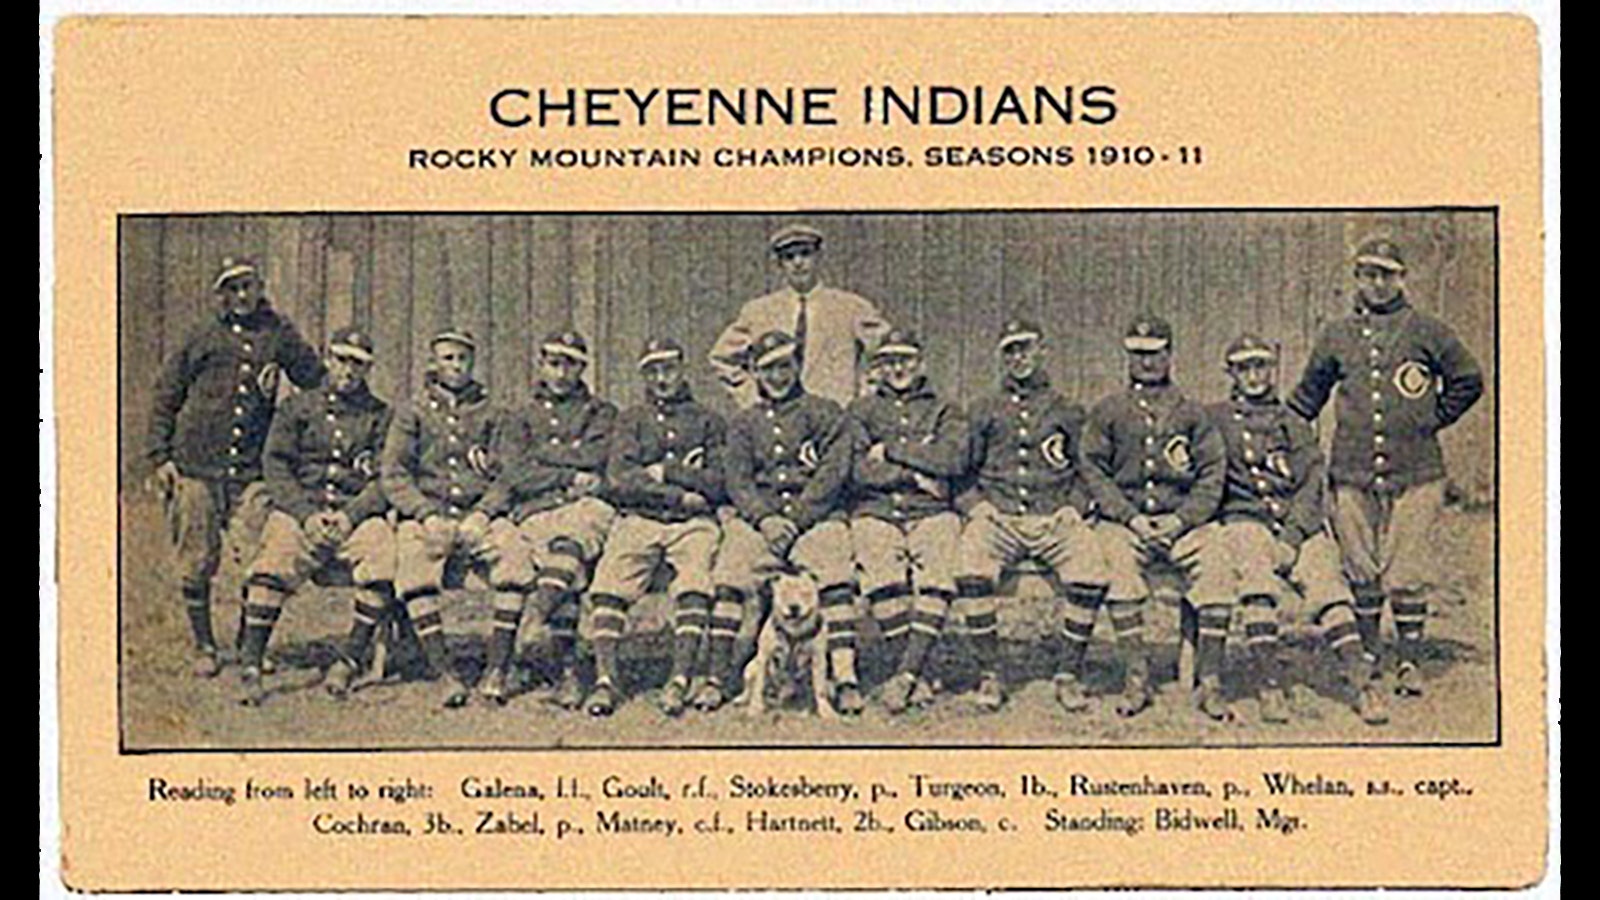 The Cheyenne Indians won the Rocky Mountain League championship in 1911, but never played the WSP All-Stars.